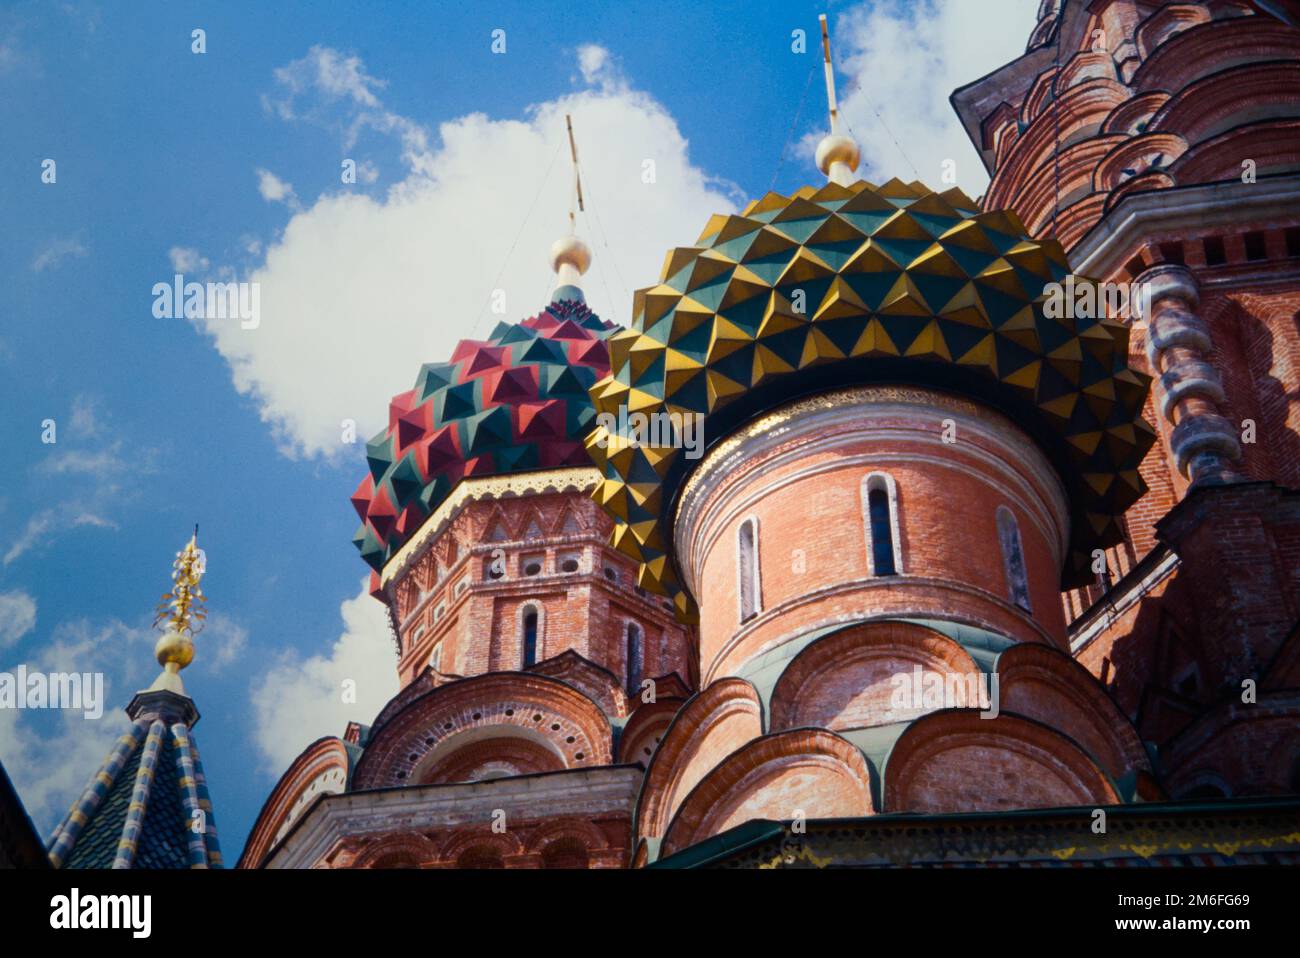 Historical, Archive View Looking Up To The Coloured Onion Domes Of Saint Basils Cathedral Or Cathedral Of Vasily the Blessed Or Trinity Cathedral In Red Square Moscow 1990 Stock Photo